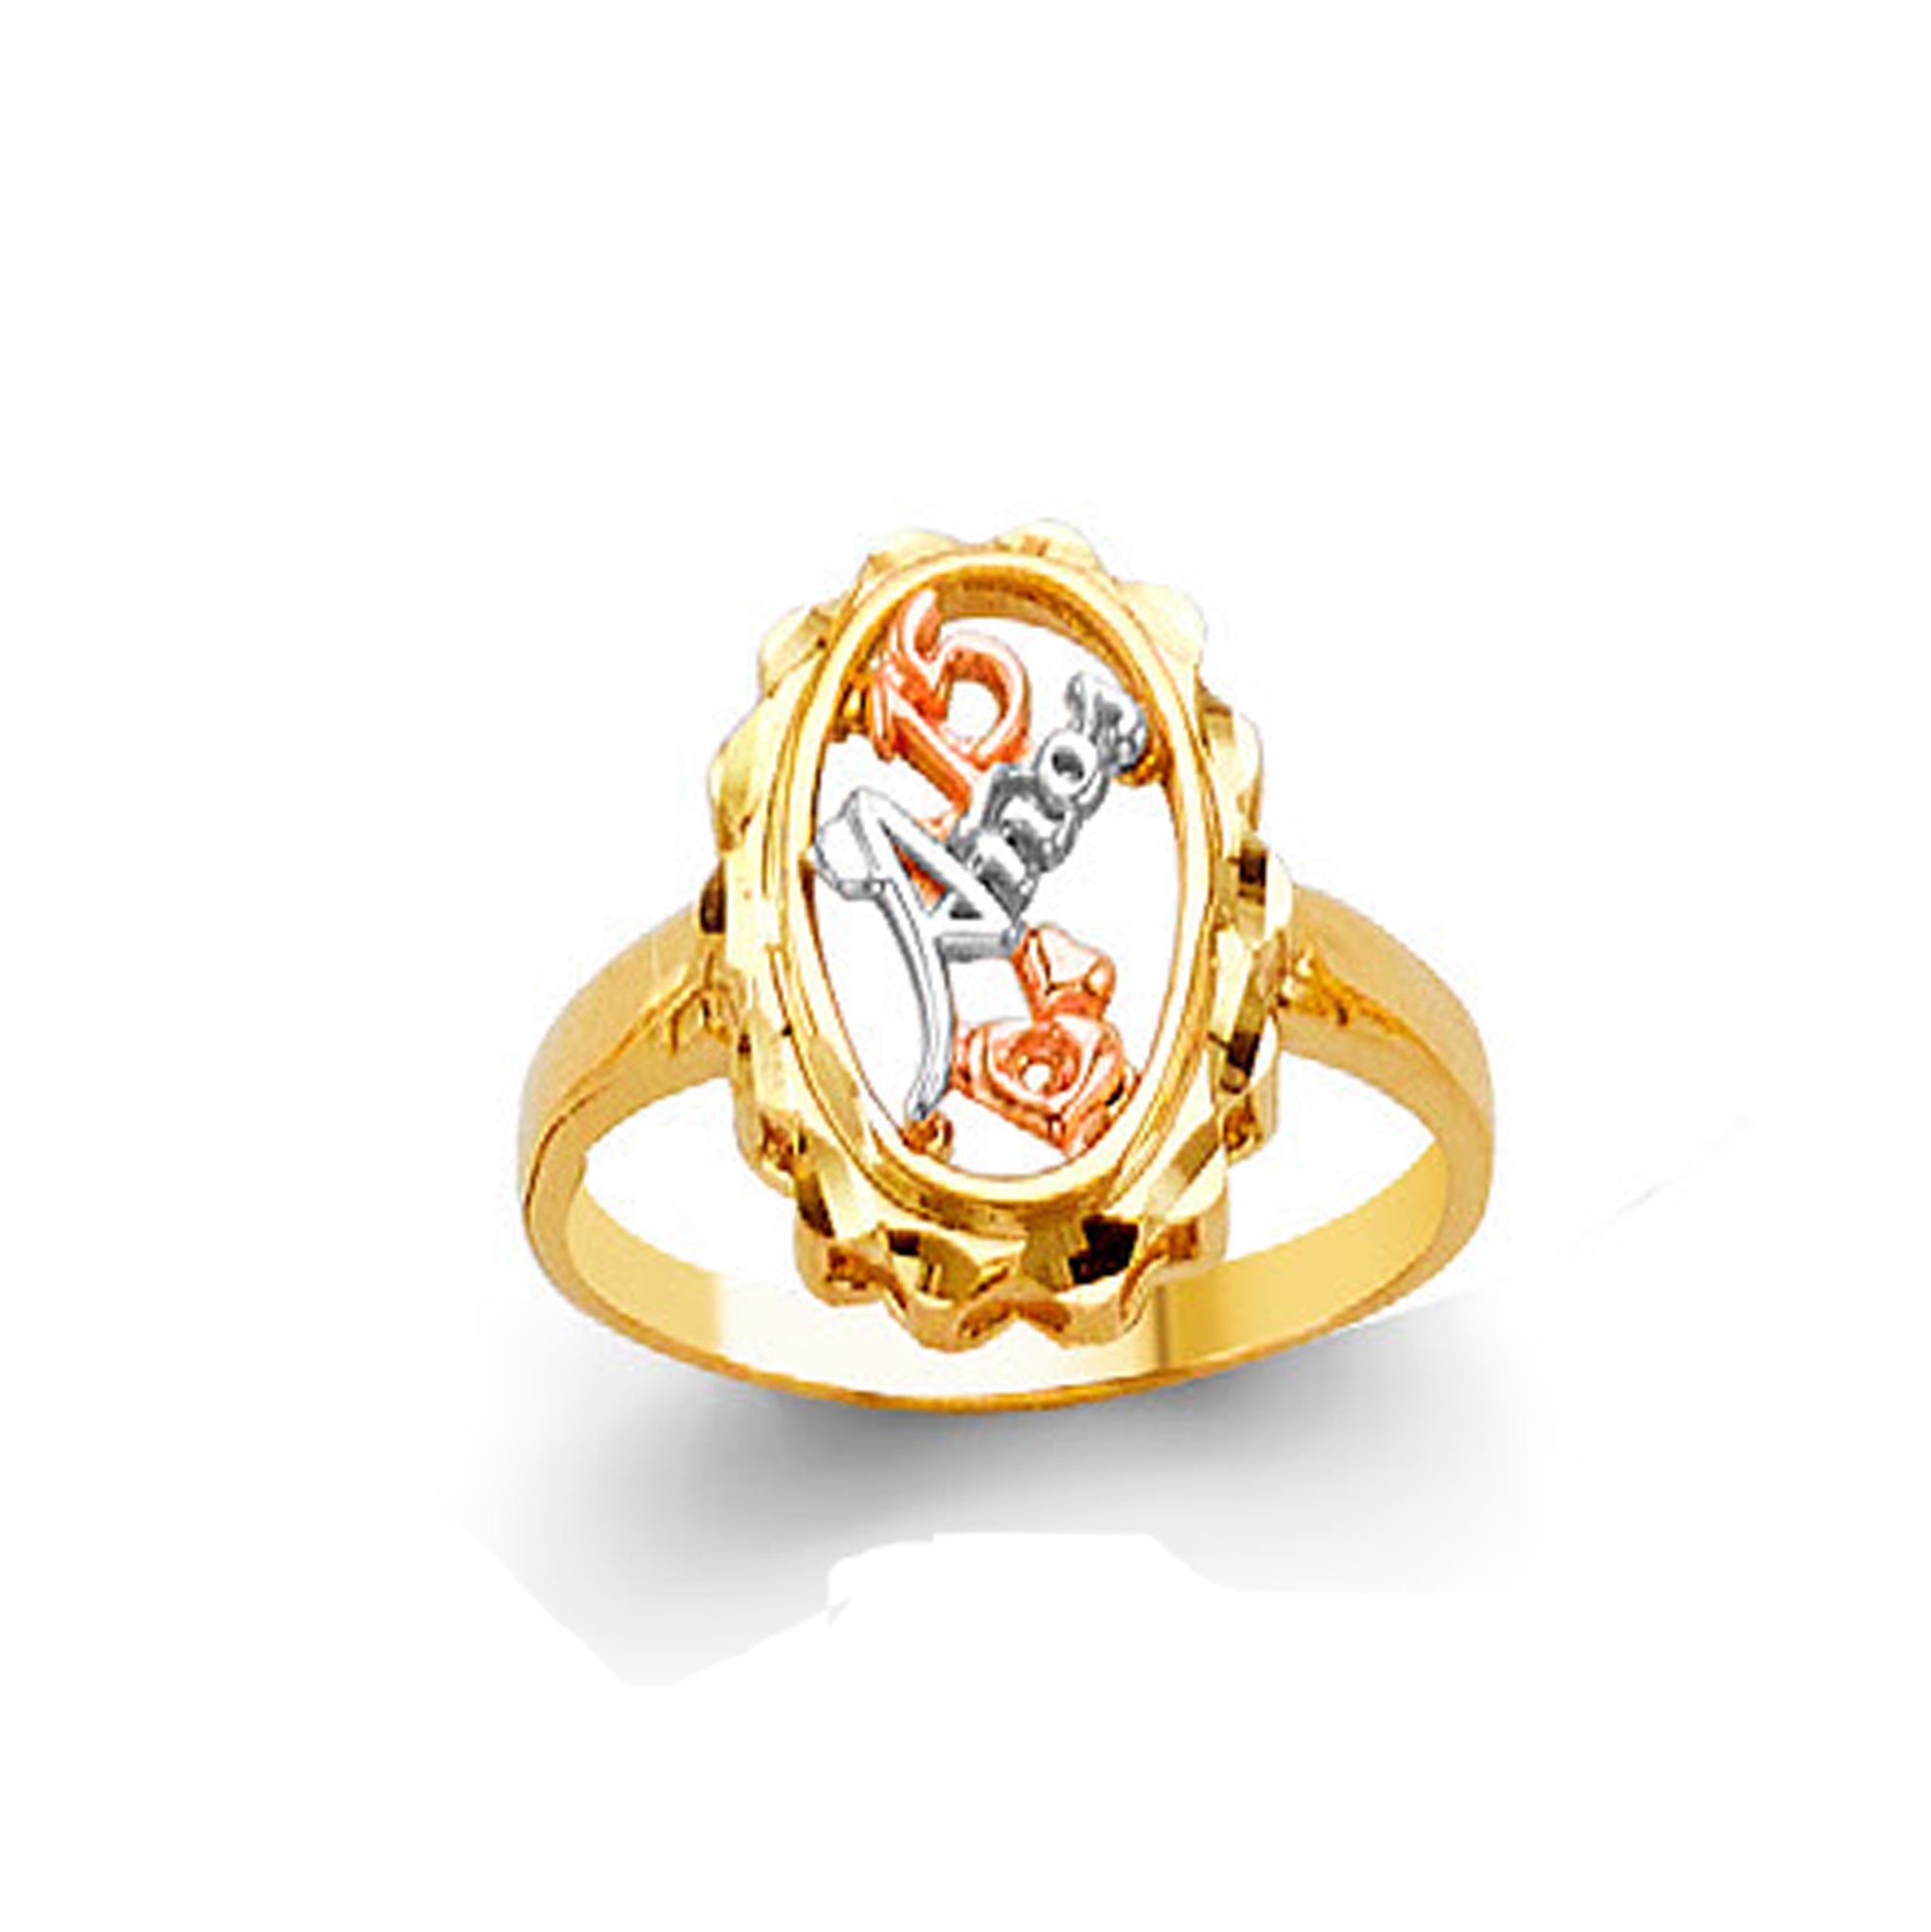 Designer 15 Anos Dual Tone Ring in Solid Gold 